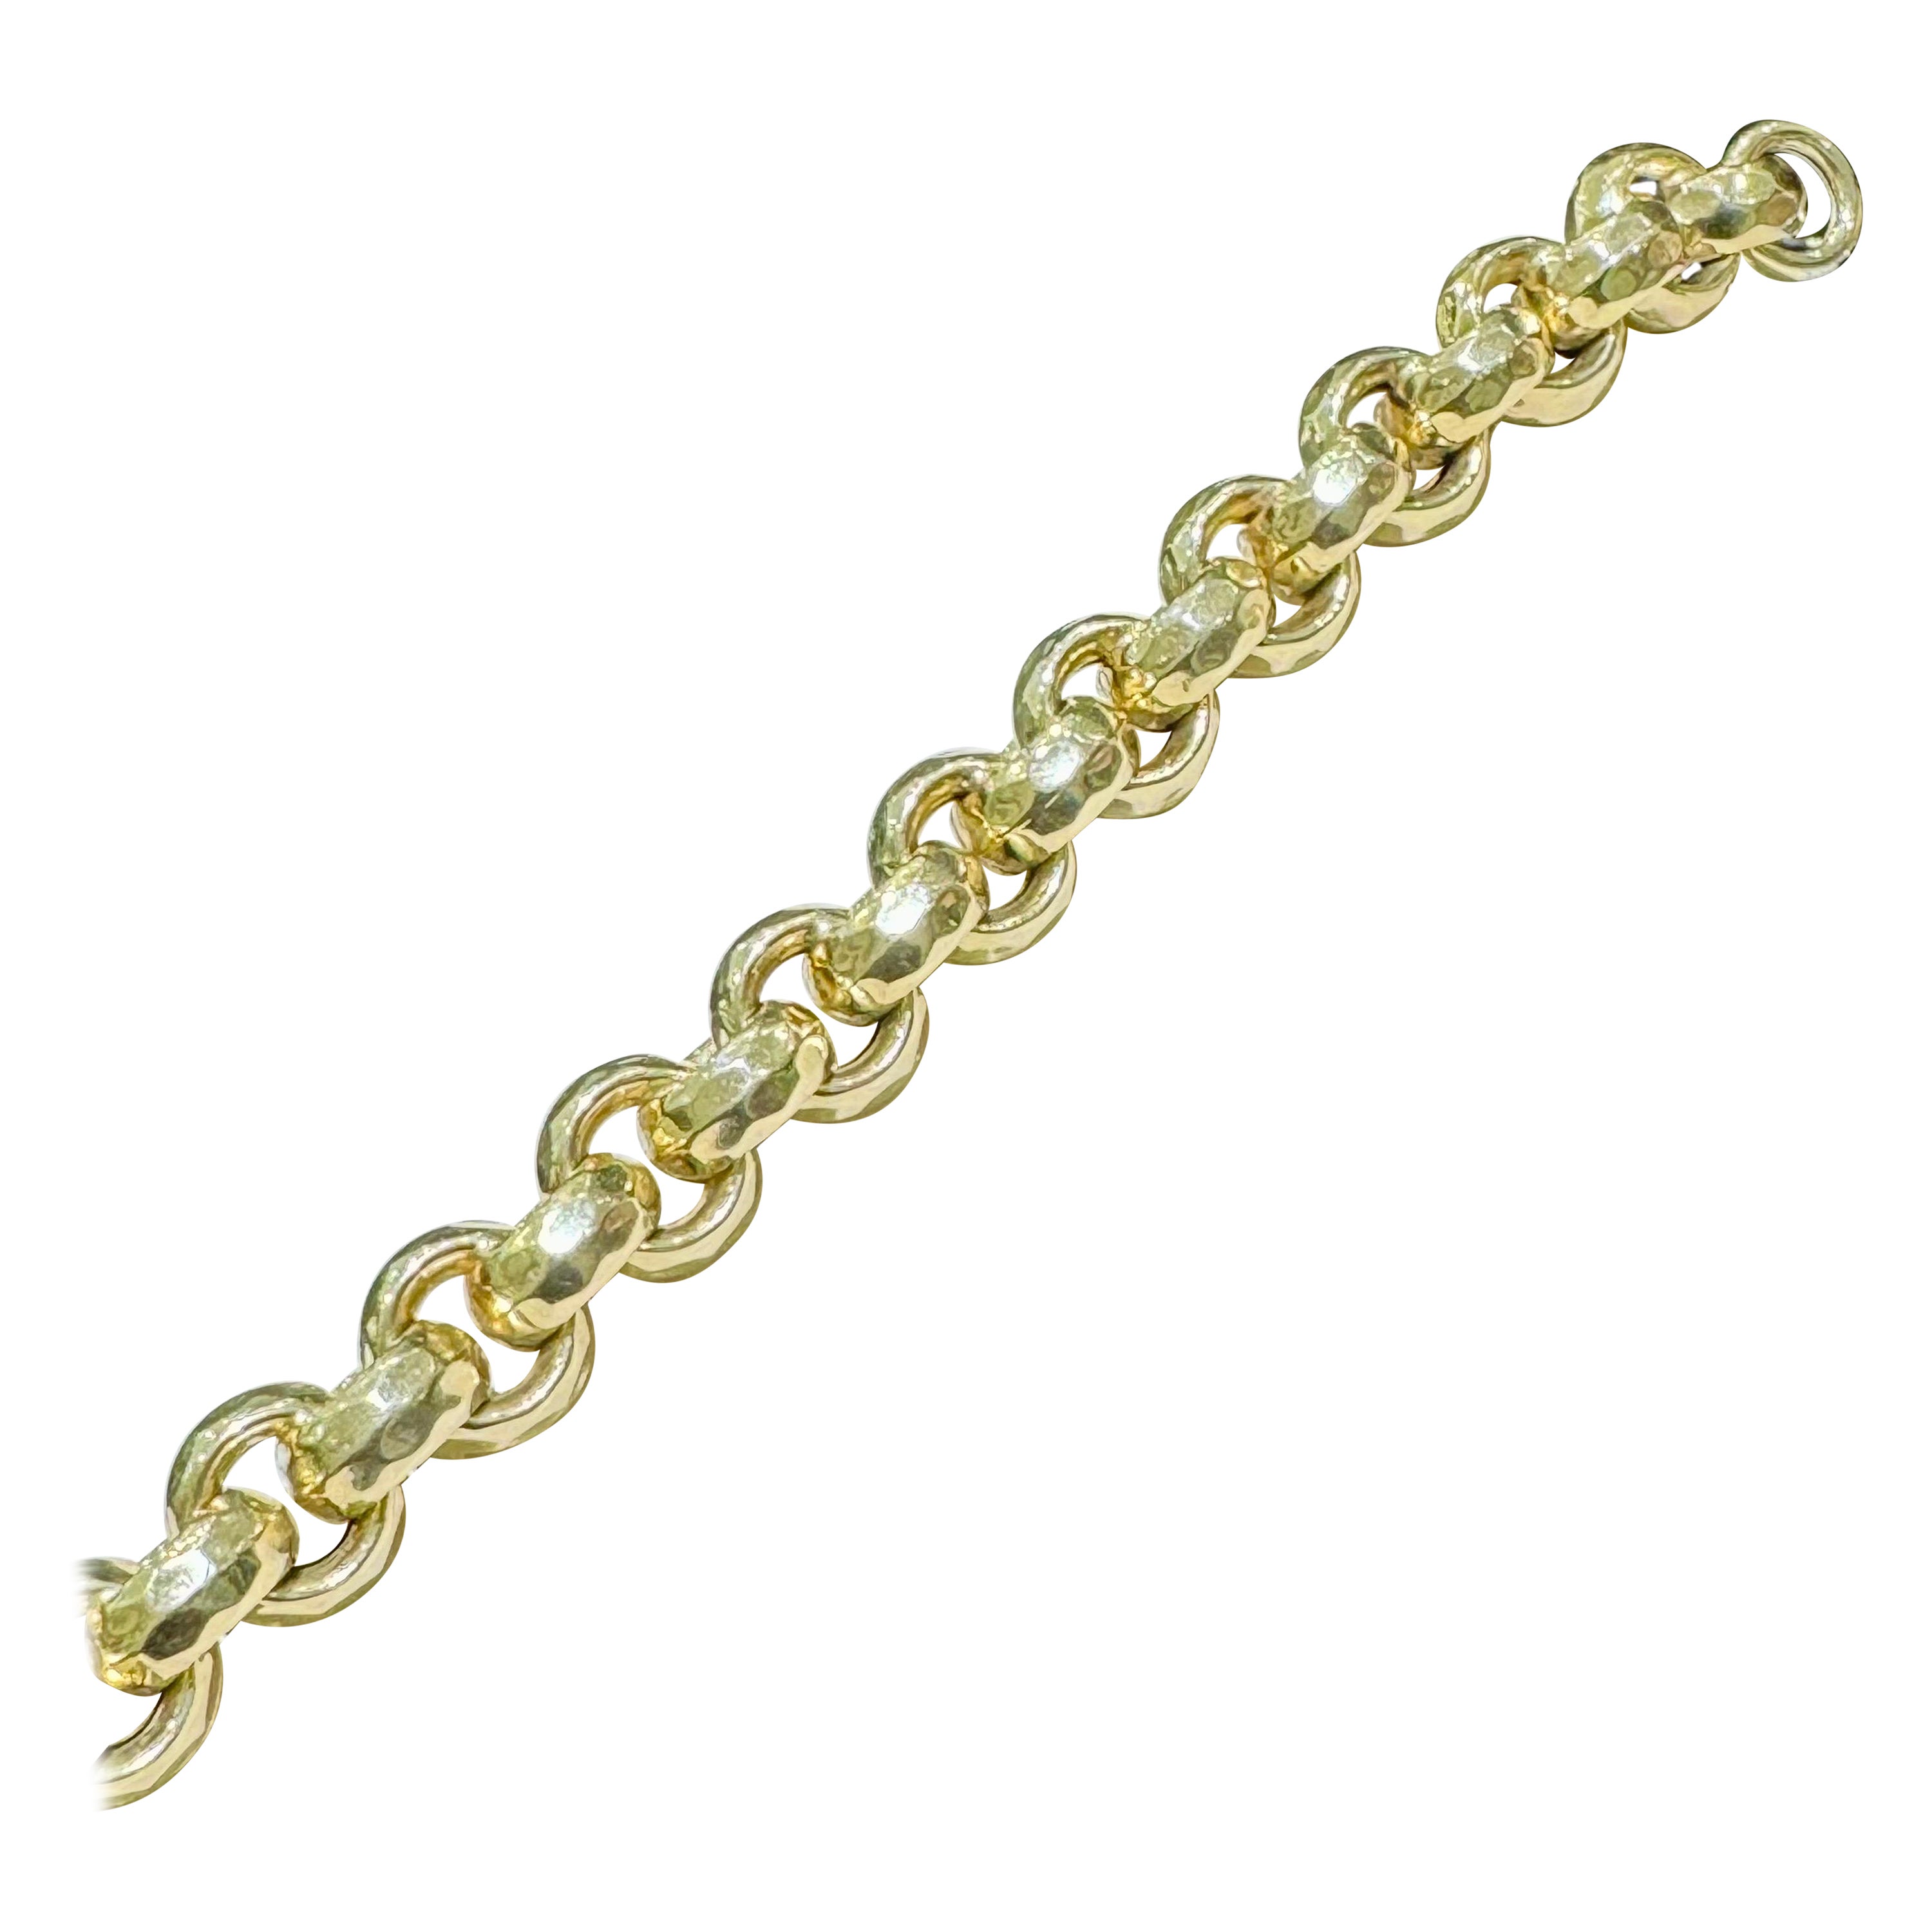 14k Chunky Round Link Bracelet In 14k. Fits 6.25”-6.5” wrist size. Hallo. Weight is 15 grams.